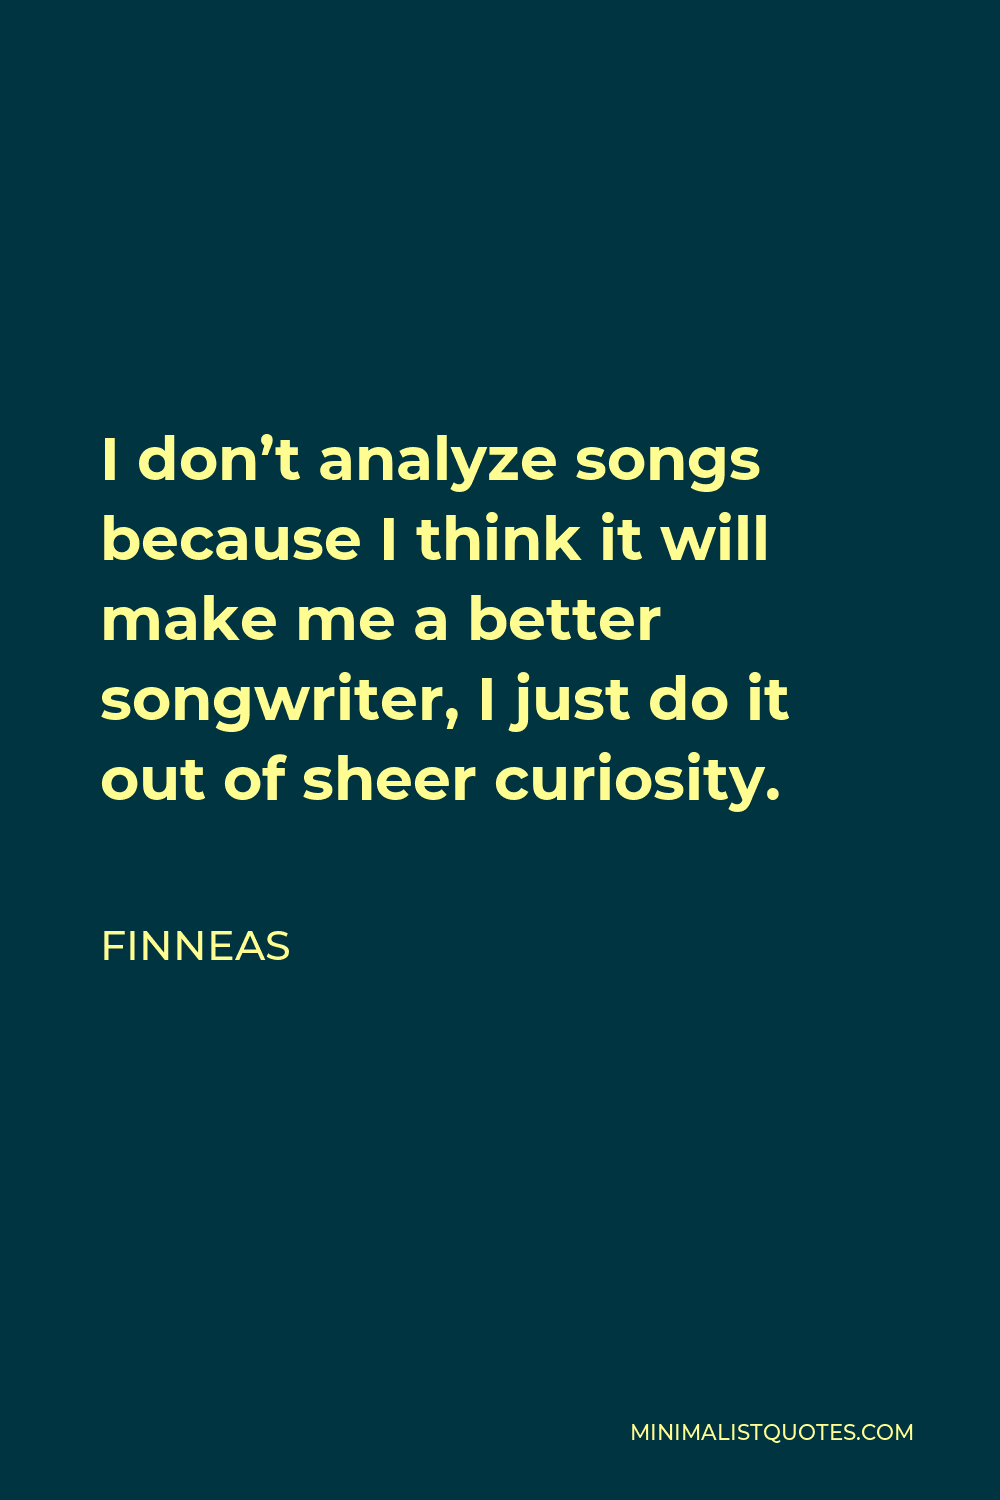 Finneas Quote - I don’t analyze songs because I think it will make me a better songwriter, I just do it out of sheer curiosity.